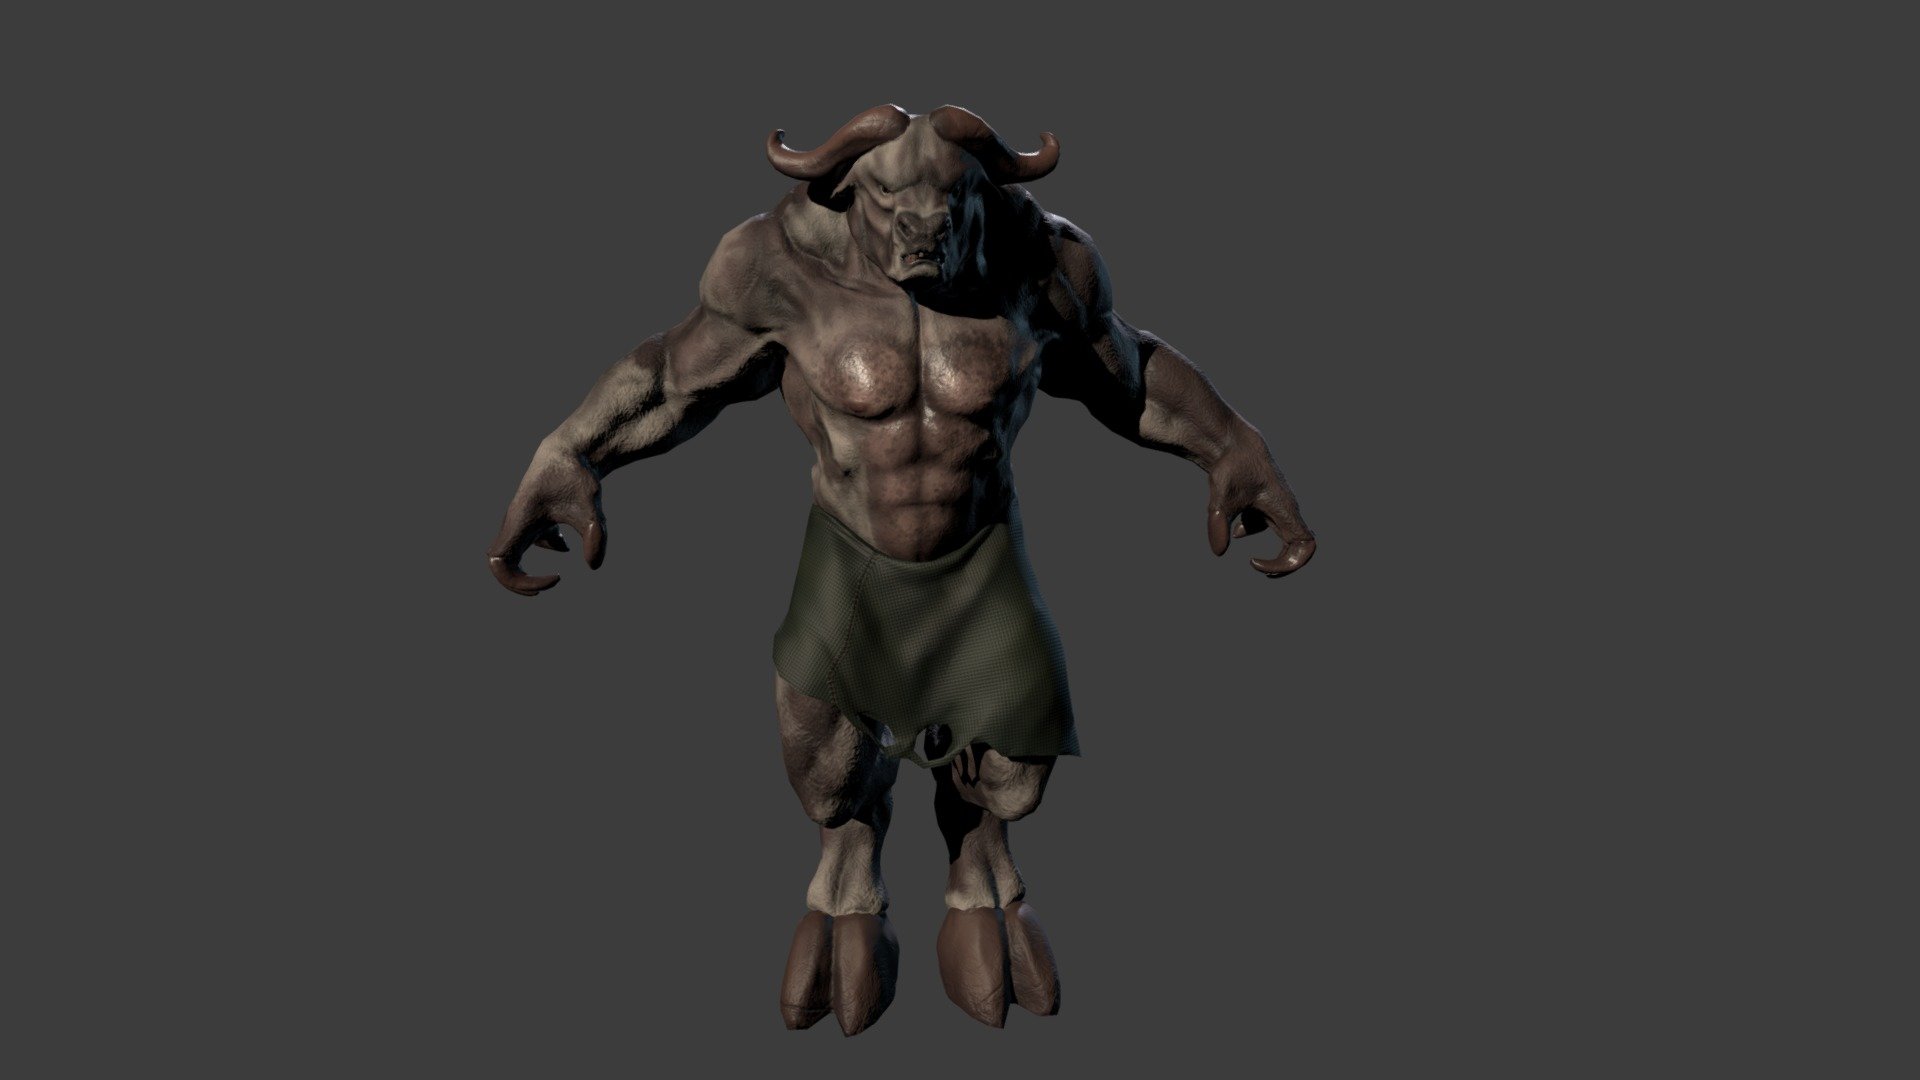 Minotaur retopo and texture for class. Origional model was provided. Retopology in Maya and textured in Substance Painter 3d model